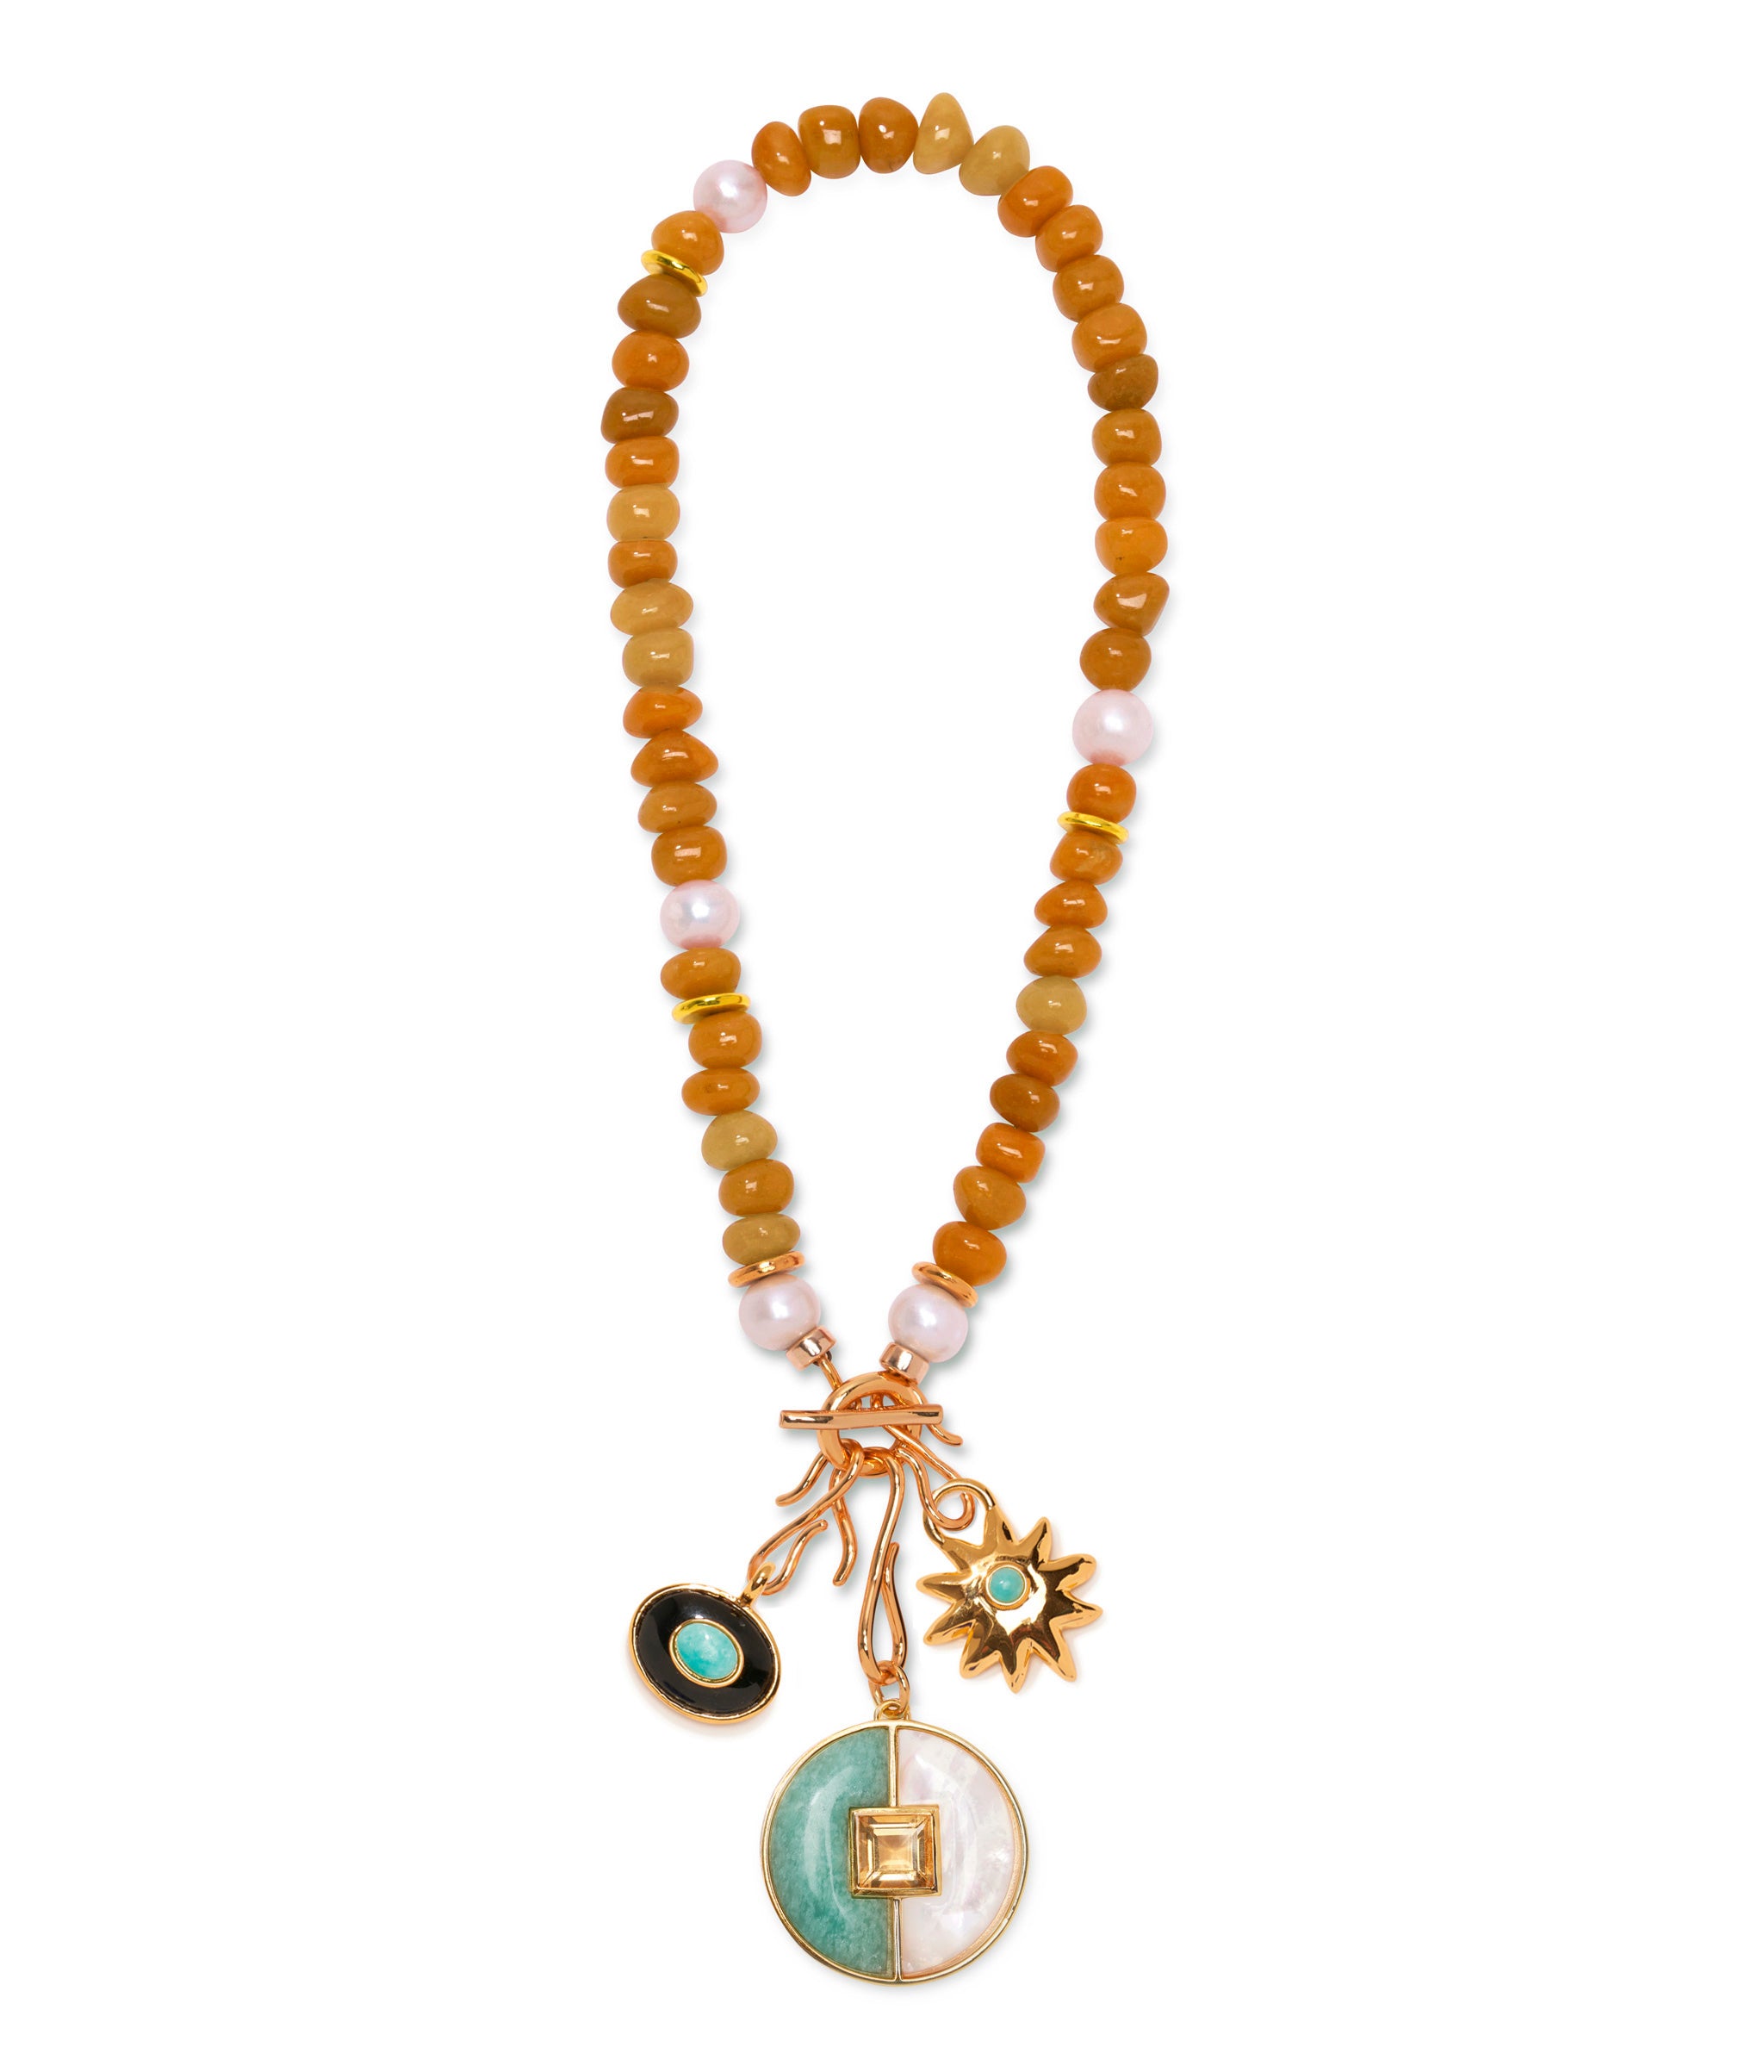 Mood Necklace in Red Aventurine with Helios and Hope charms and Porto Pendant in New Wave.